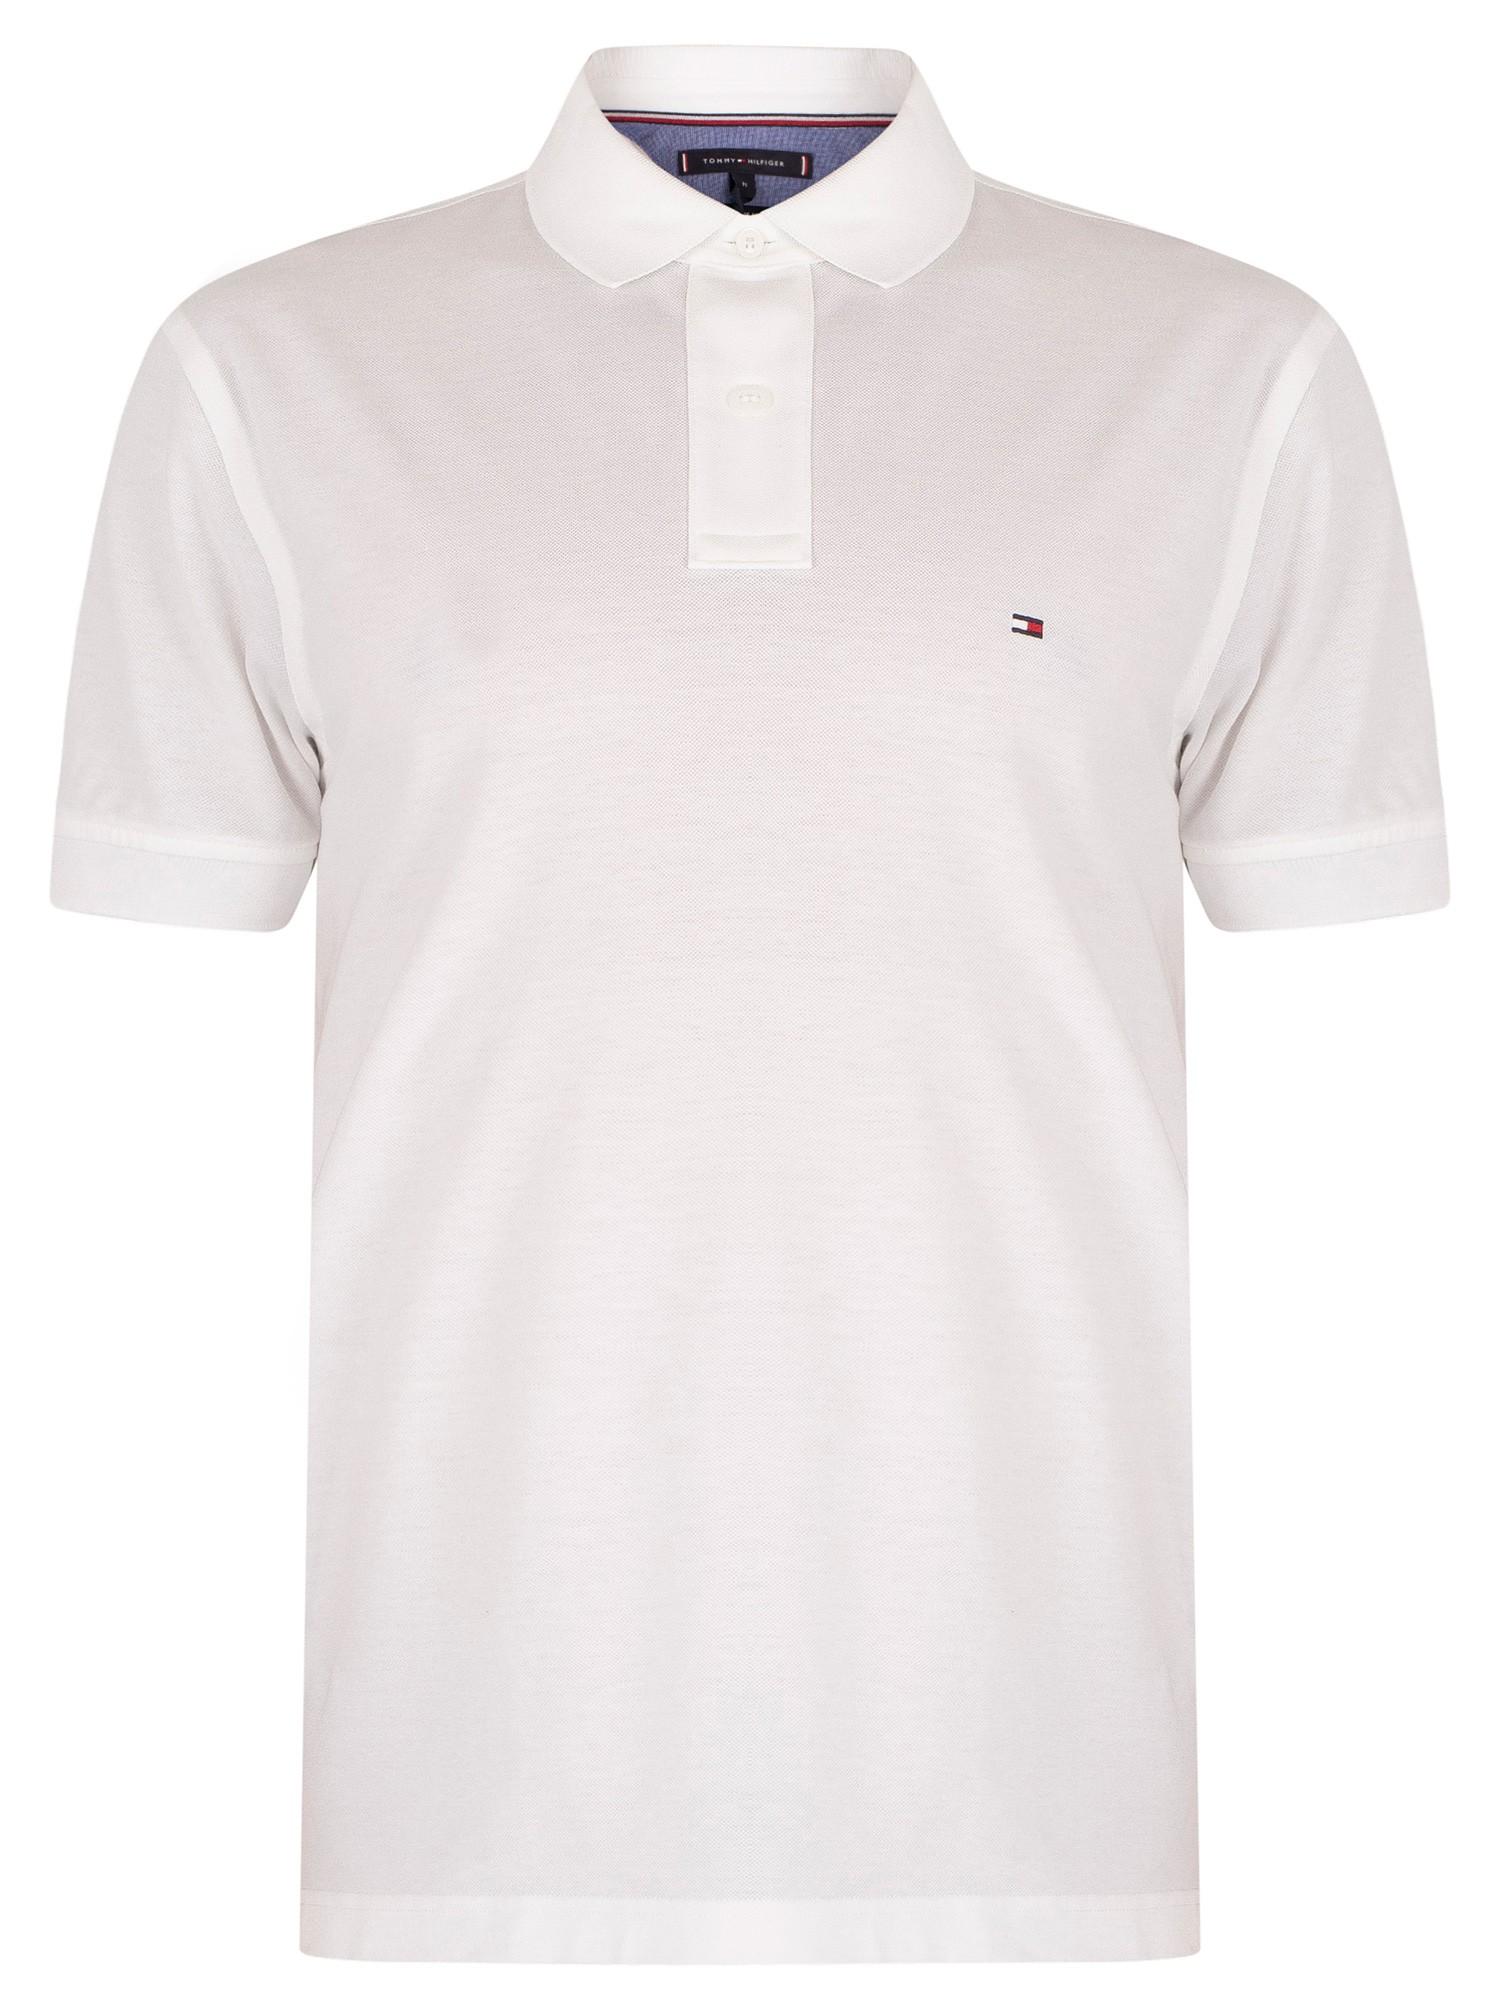 Tommy Hilfiger Cotton Core Regular Polo Shirt in White for Men - Lyst